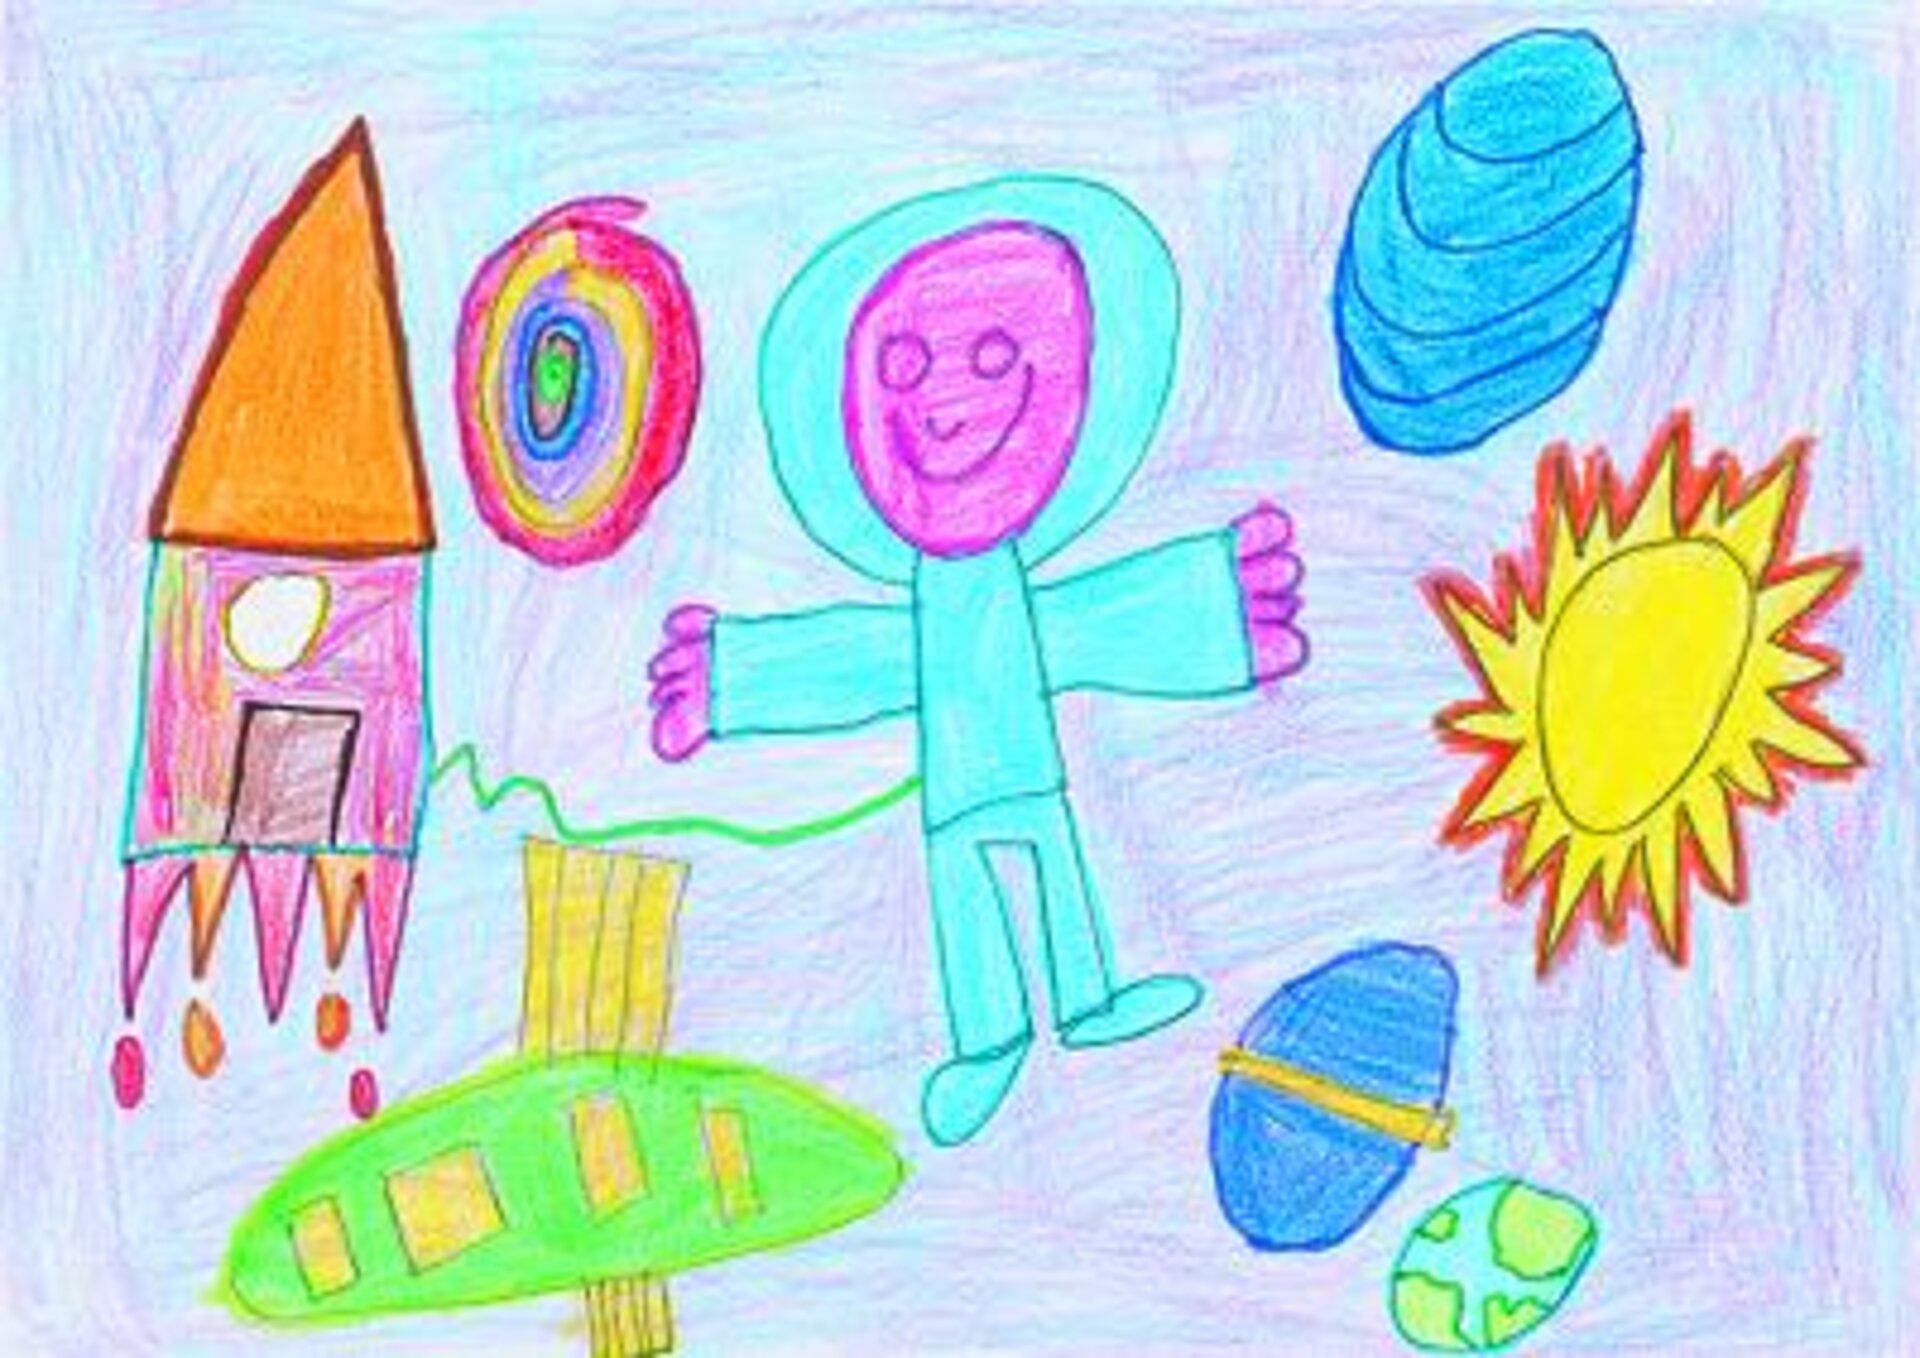 Happy and colourful drawing from the CP Ramon Laporte primary school